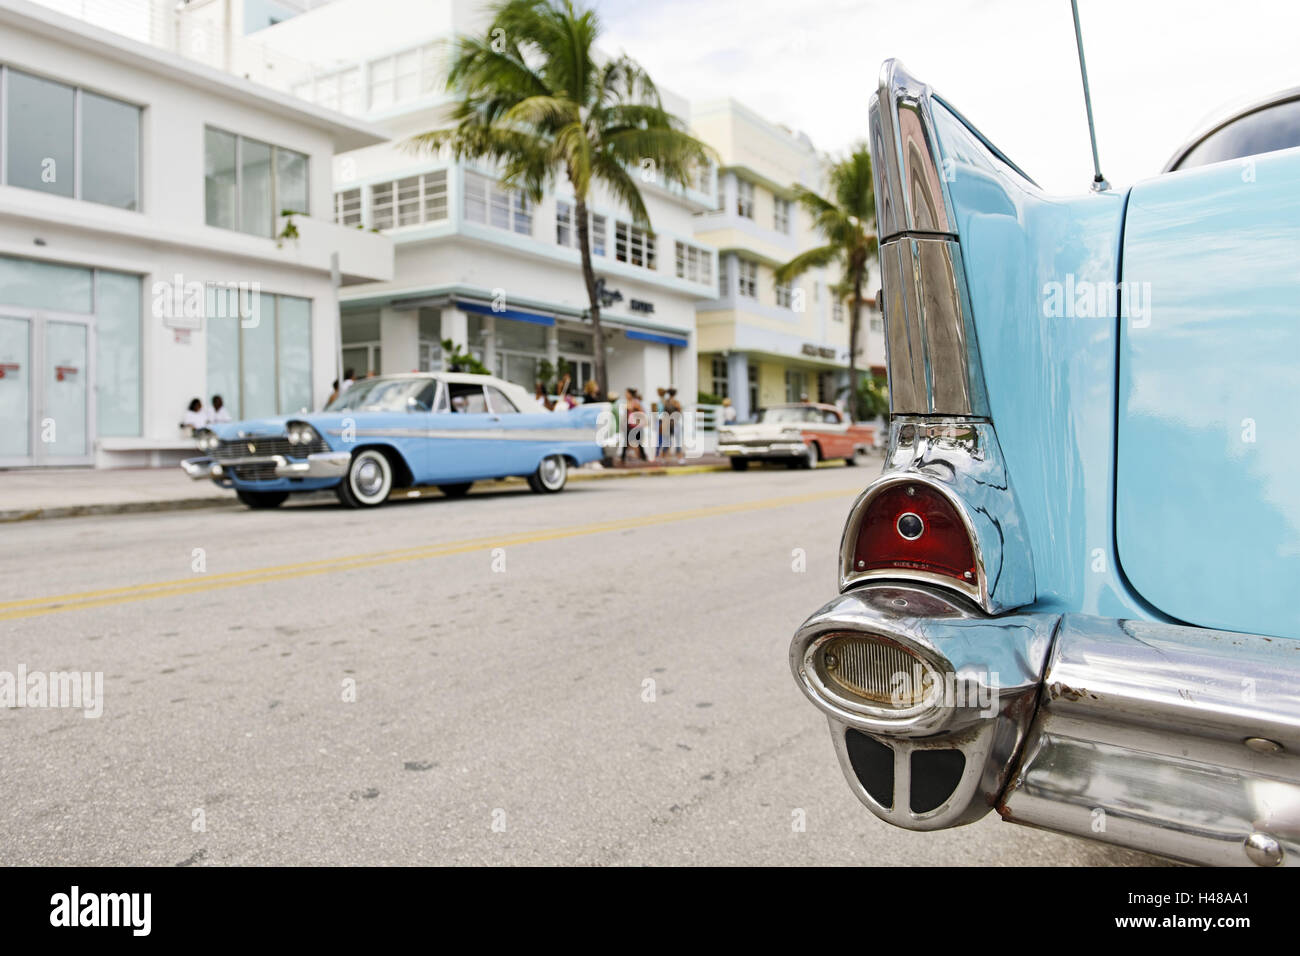 Tail view, tail fin, Chevrolet Bel Air, year of manufacture 1957, the fifties, American vintage car, Ocean Drive, Miami South Beach, Art Deco District, Florida, USA, Stock Photo